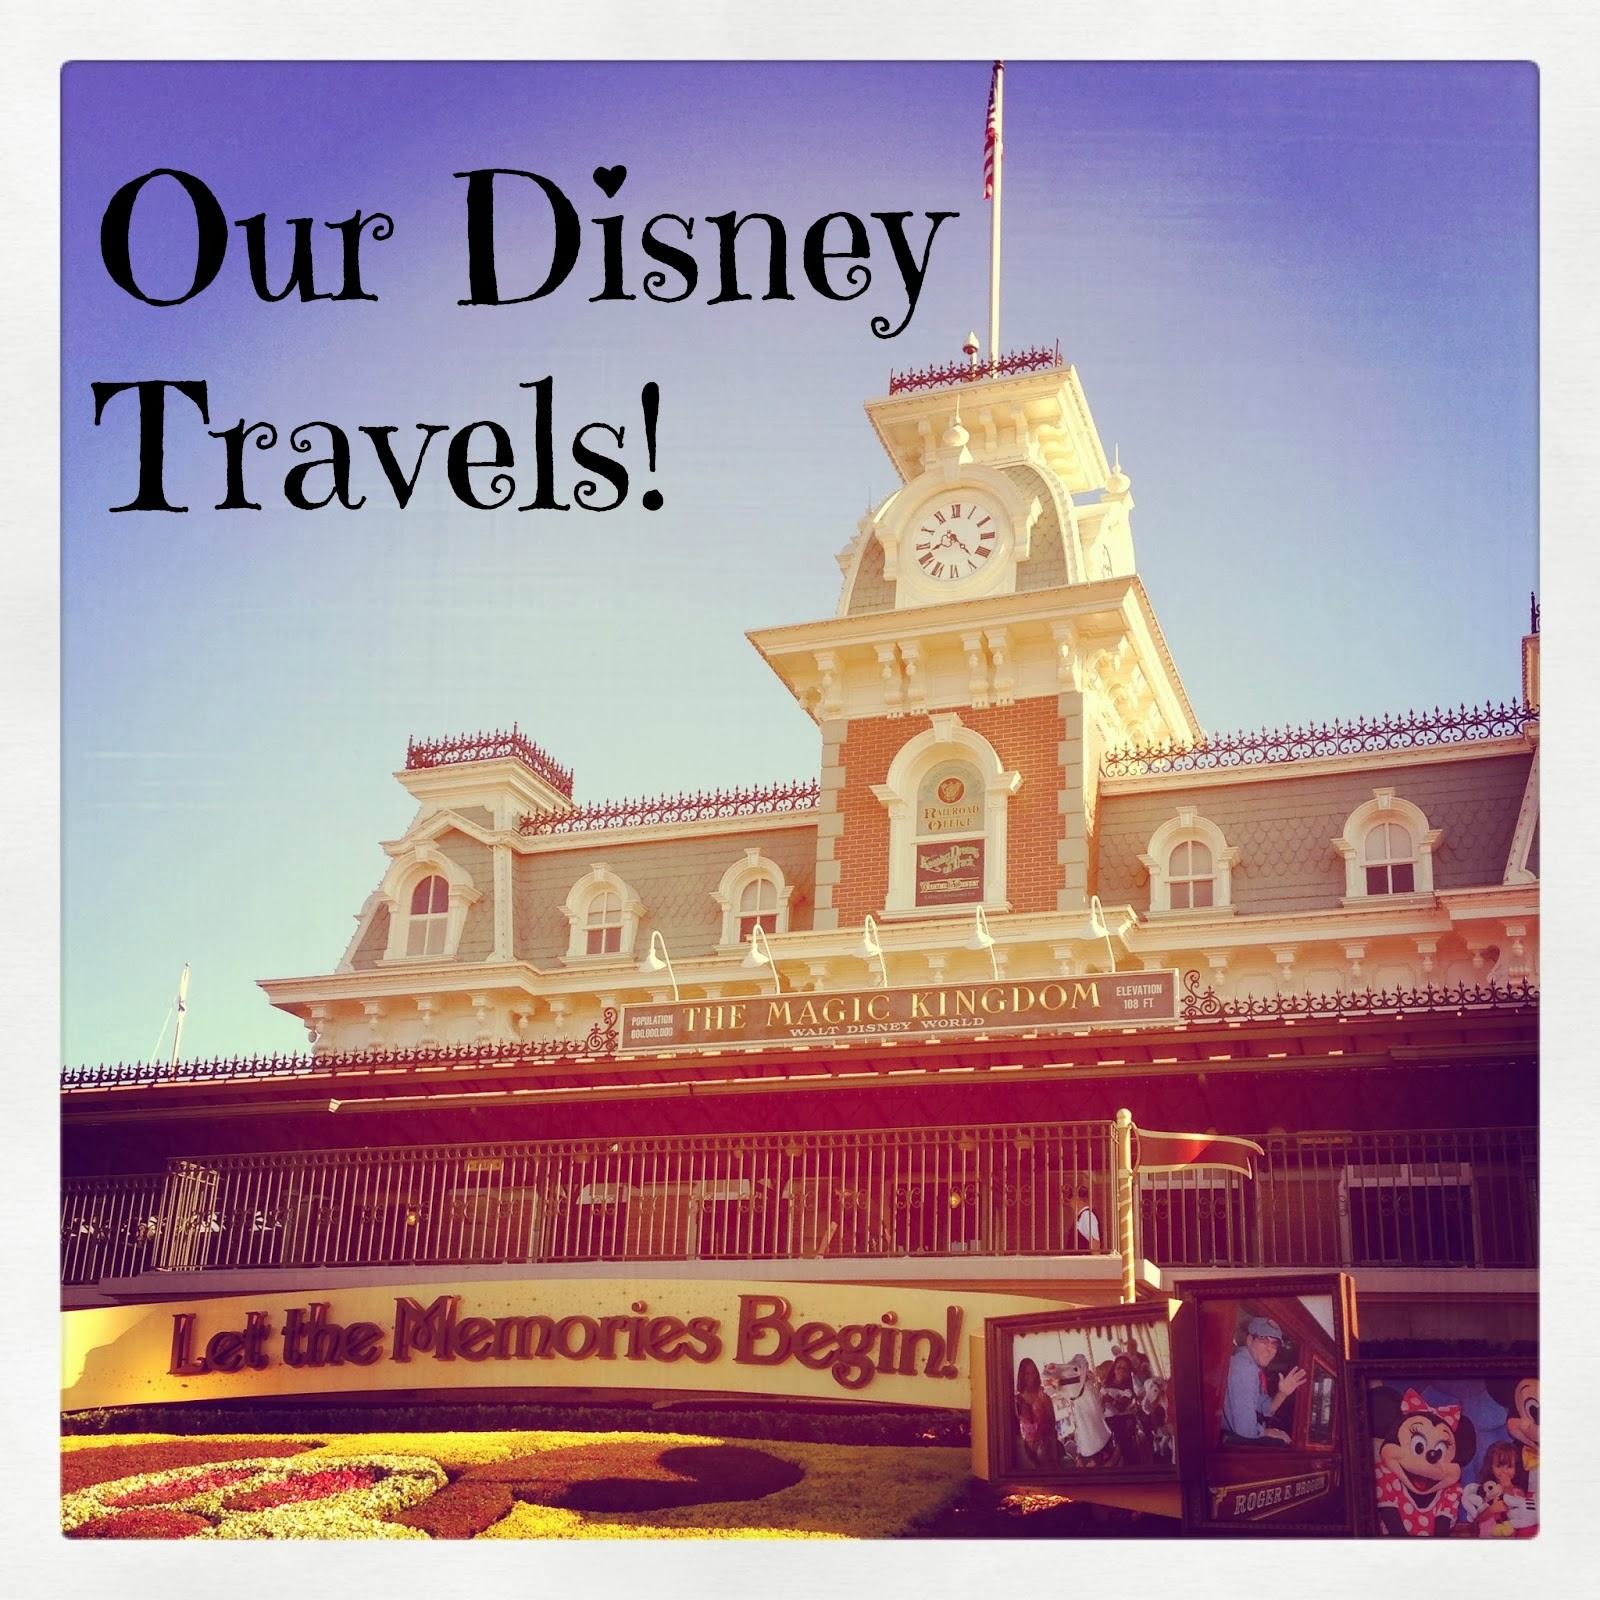 Our Disney Travels